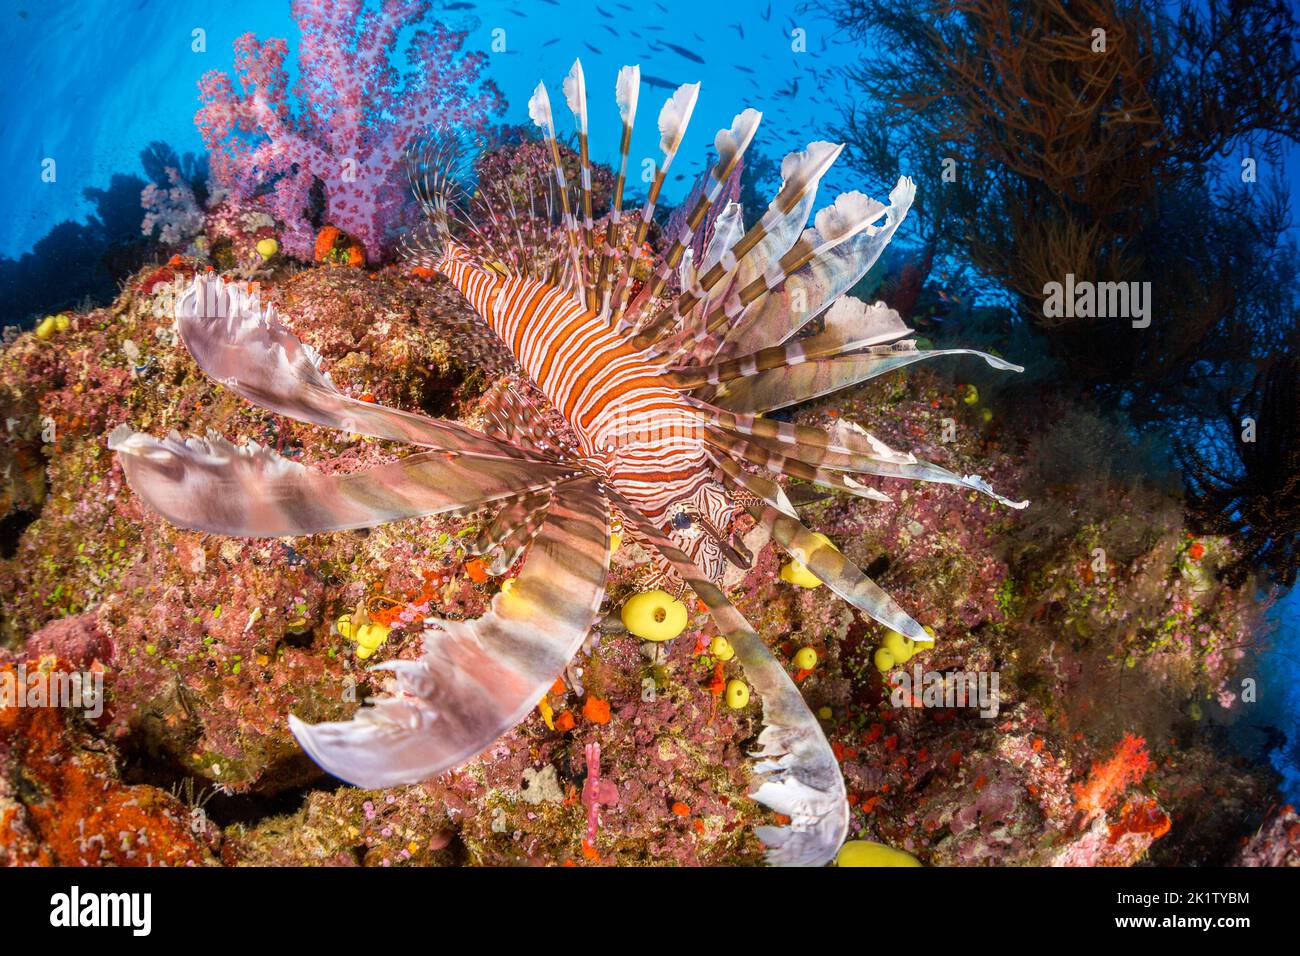 A lionfish, Pterois volitans, and alcyonarian soft coral, Fiji. Stock Photo